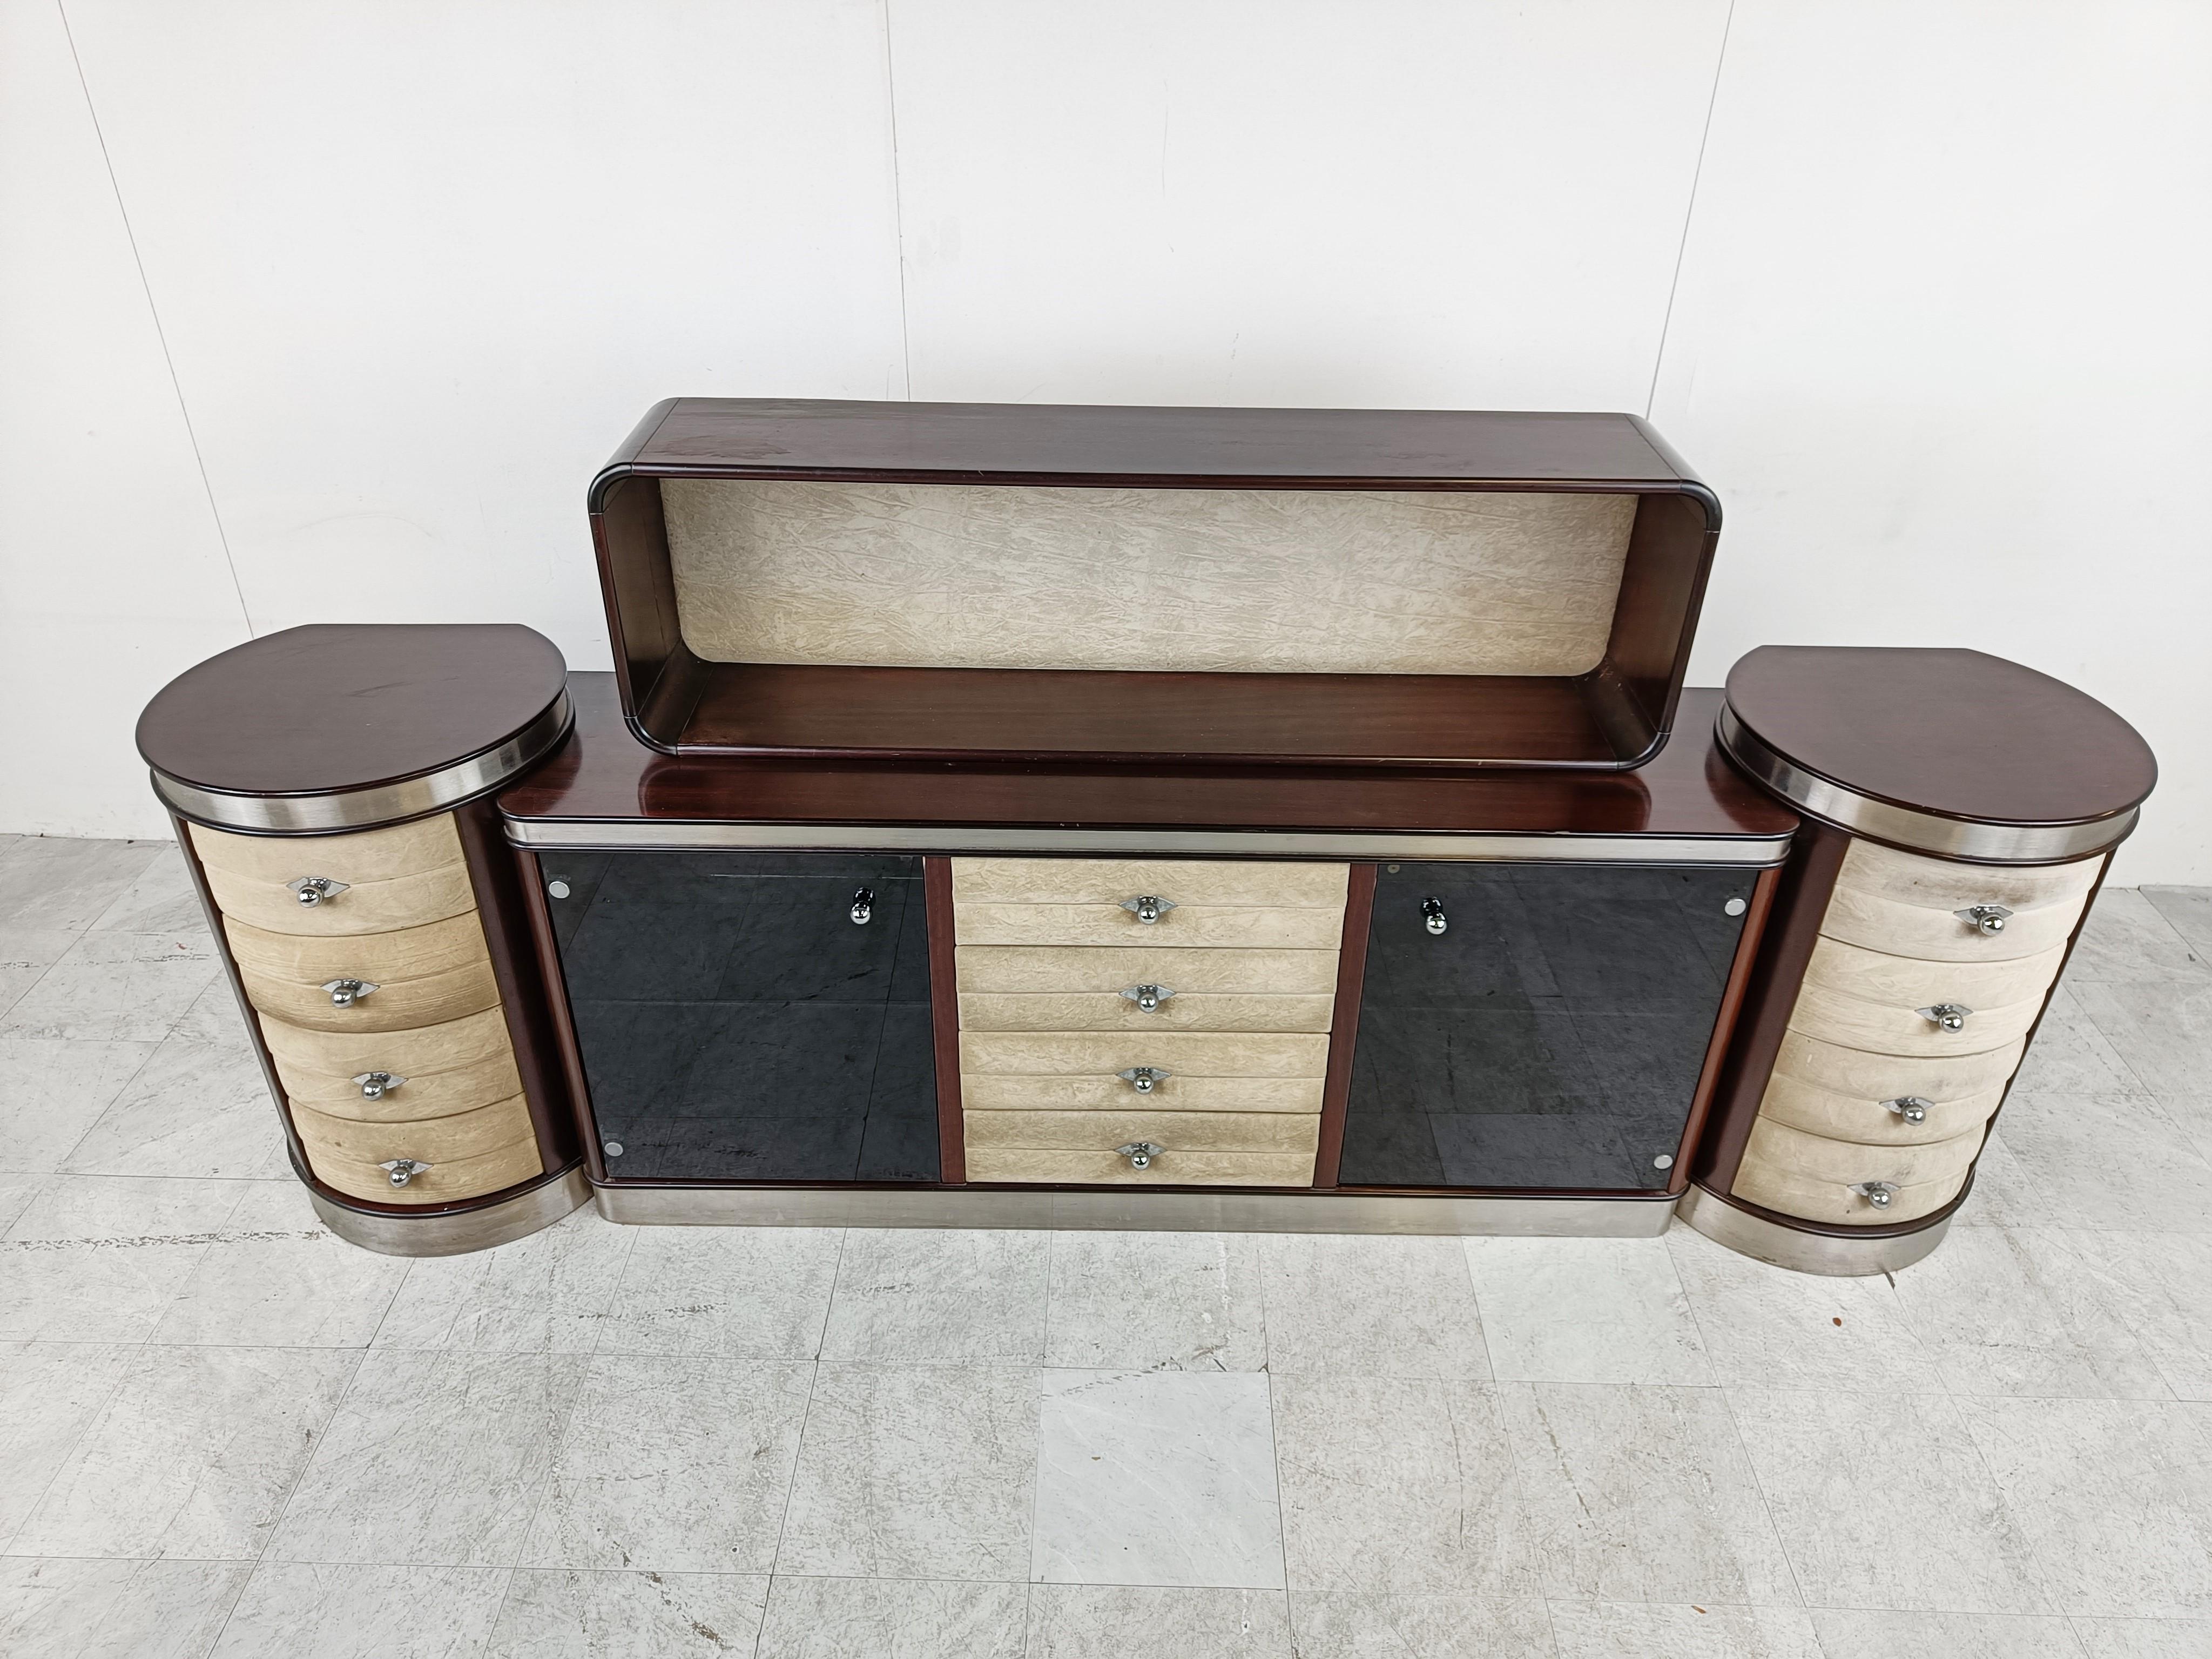 Exceptional sideboard made in italy in the 1970s.

This sideboard is made out of wood, aluminum, smoked glass doors and beige velvet.

The upper part is loose so you can decide to either use it or not. The sideboard was in fact used in a dining